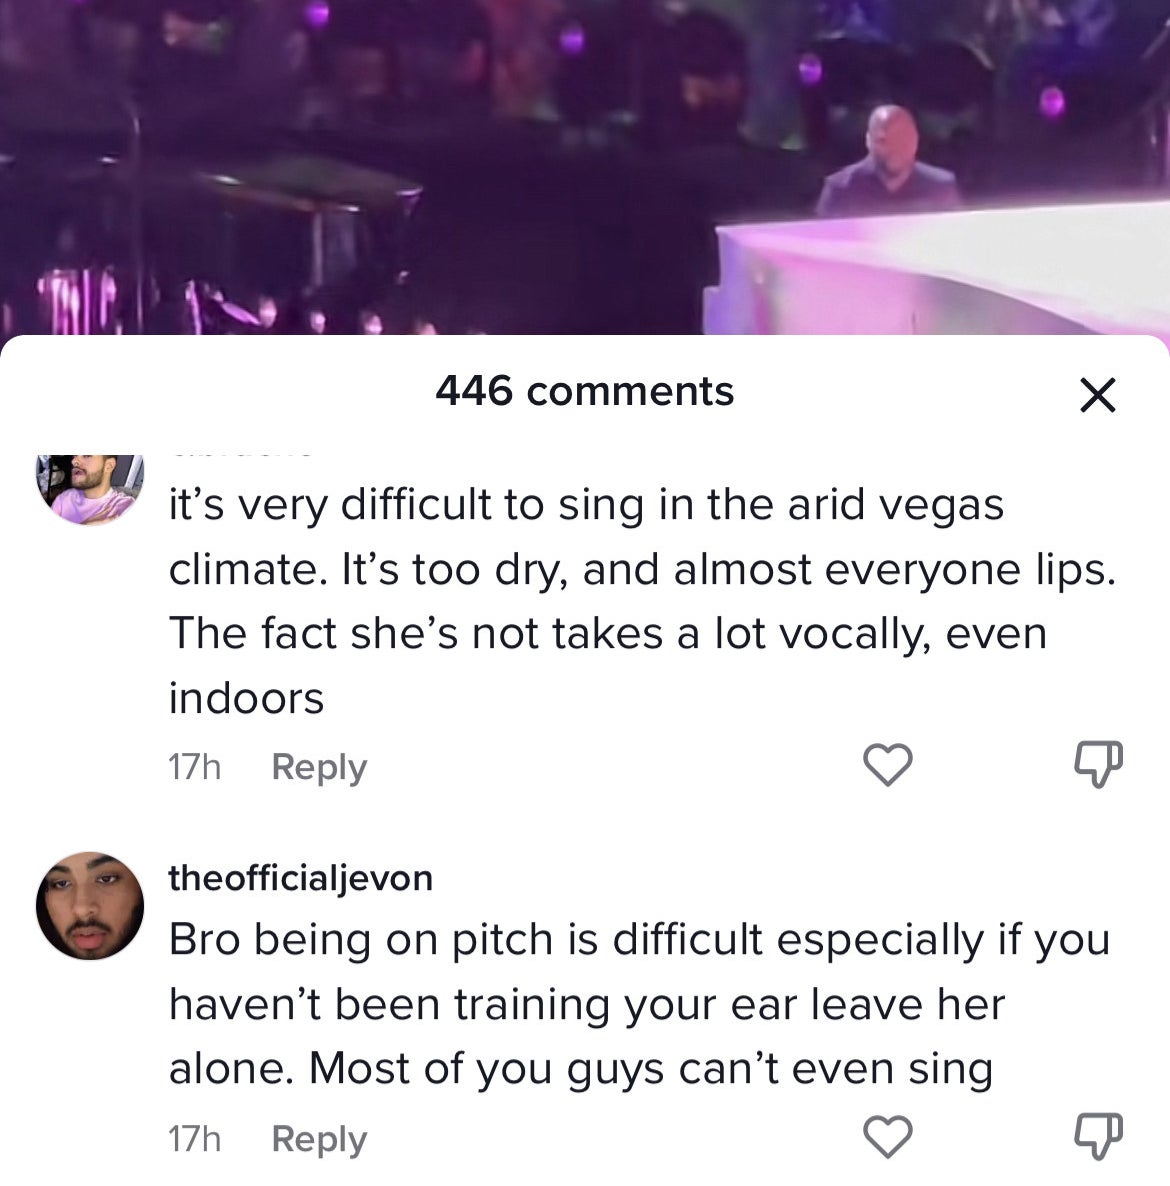 &quot;It&#x27;s very difficult to sing in the air vegas climate&quot; and &quot;Bro being on pitch is difficult especially if you haven&#x27;t been training your ear leave her alone&quot;